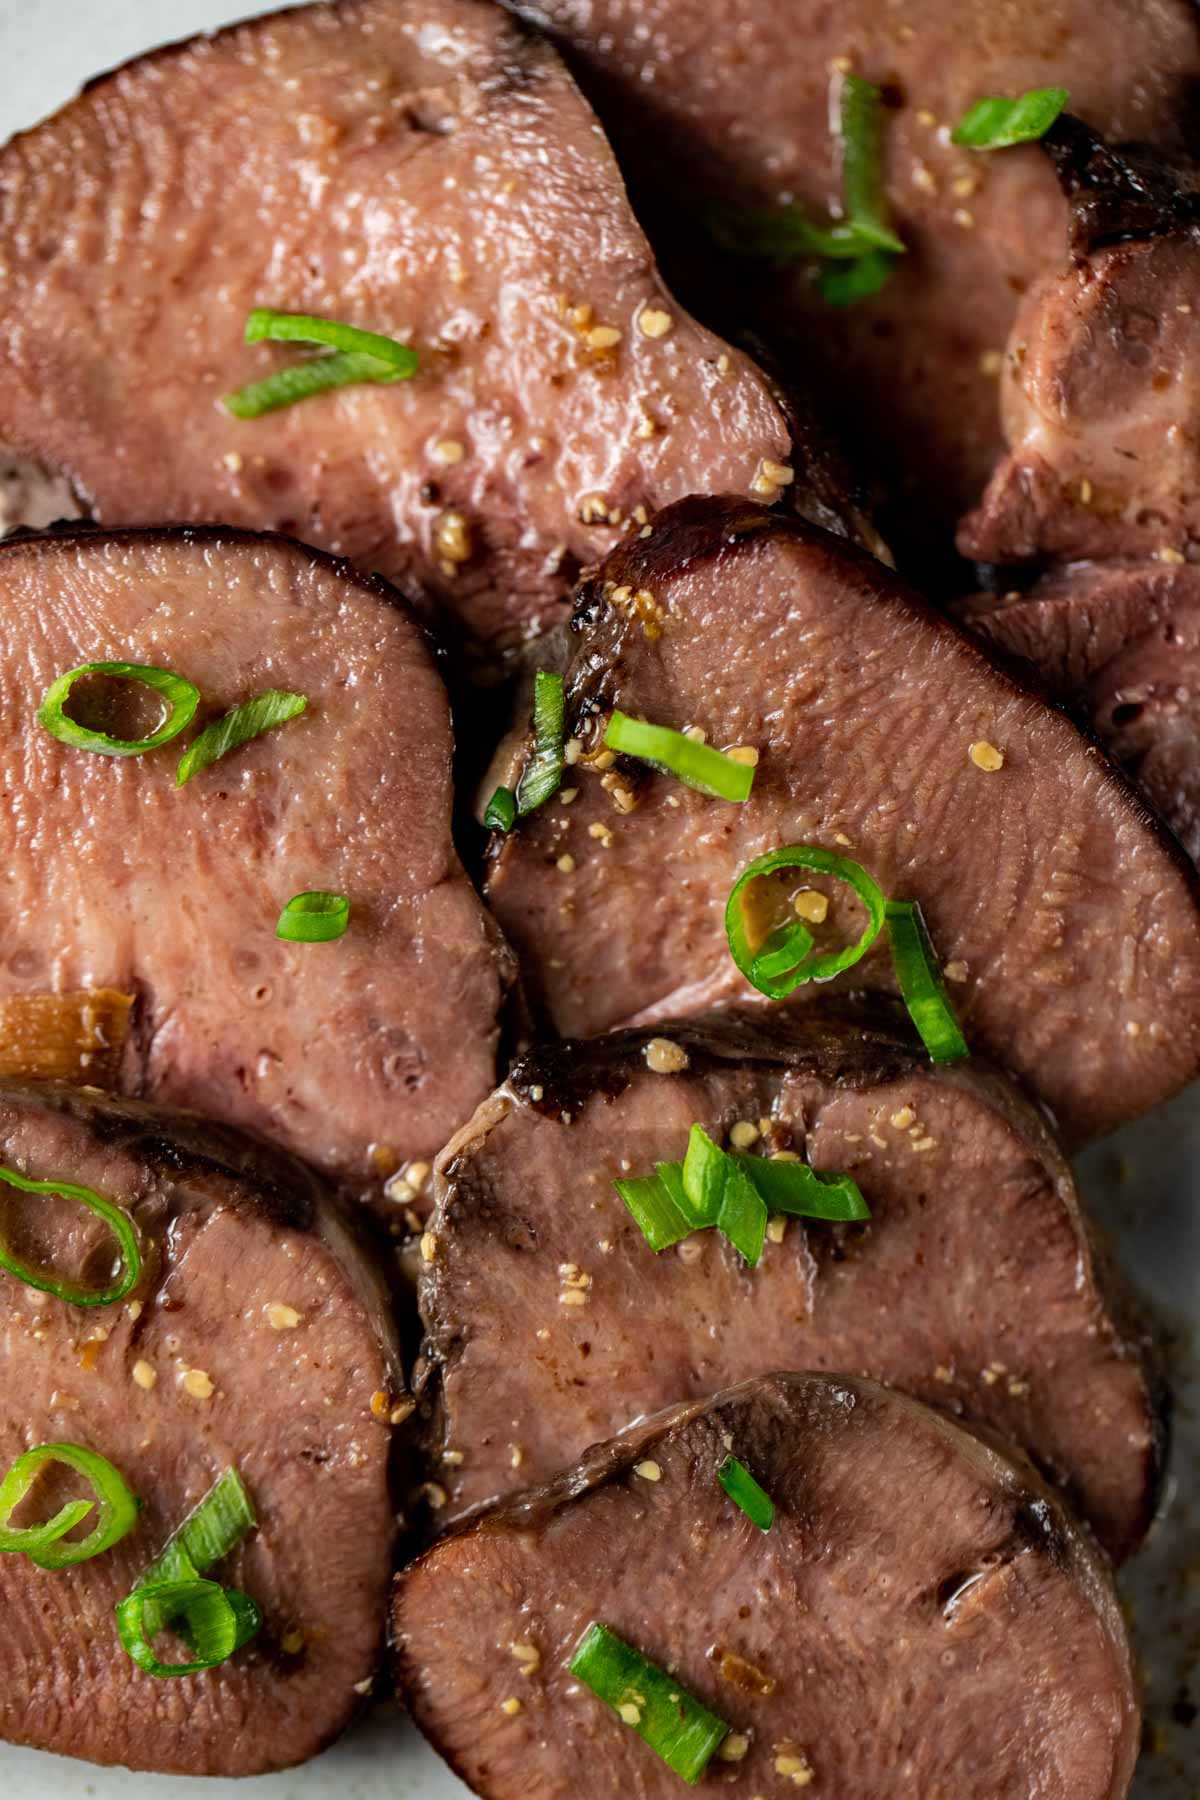 https://www.wenthere8this.com/wp-content/uploads/2022/09/sous-vide-beef-tongue-1.jpg